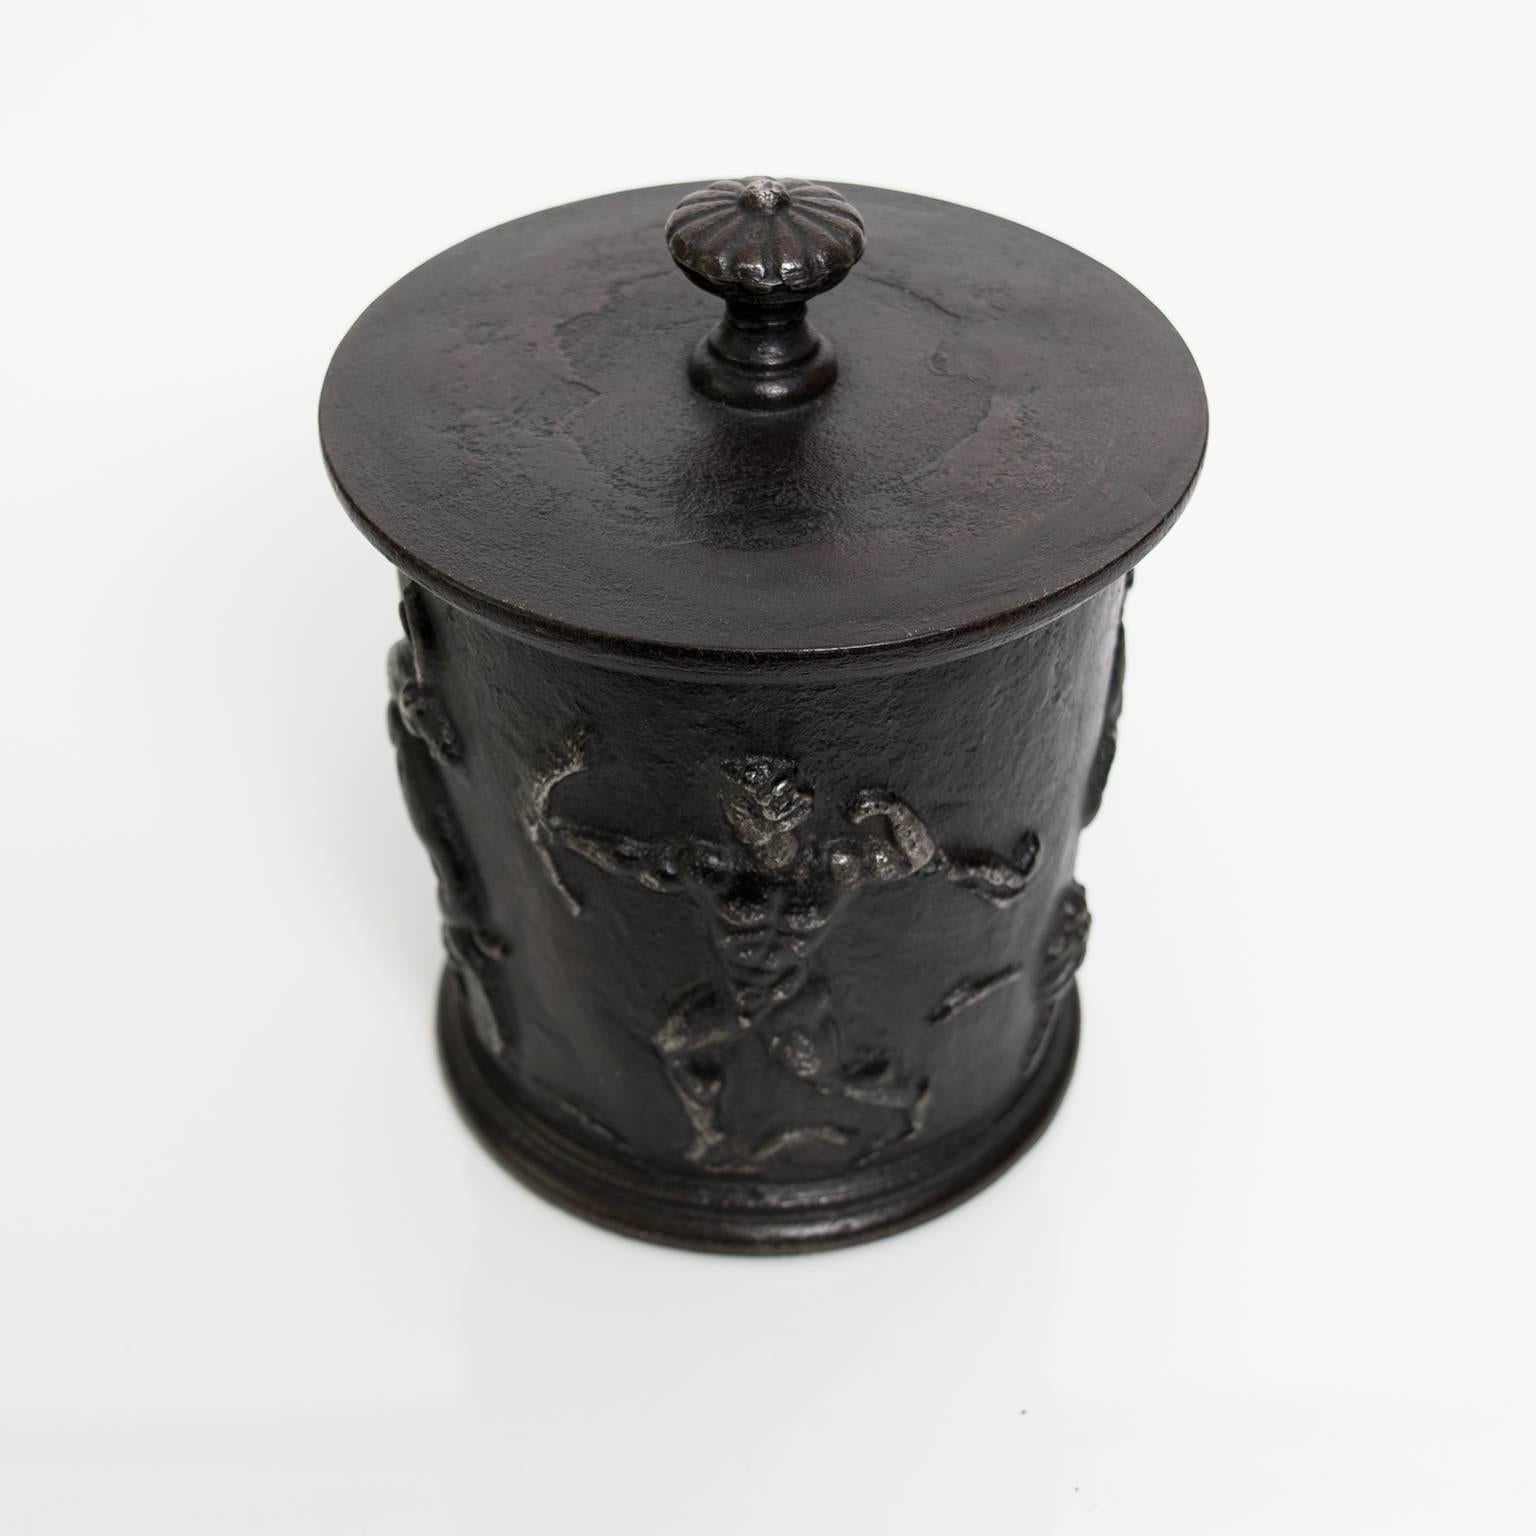 Scandinavian Modern, Swedish Grace cast iron tobacco jar with lid. The exterior is decorated with a male and female figure, a stag, a doe and a bird. Designed by Carl Elmberg for famed ironworks company Näfveqvarns Bruk. Total height 7